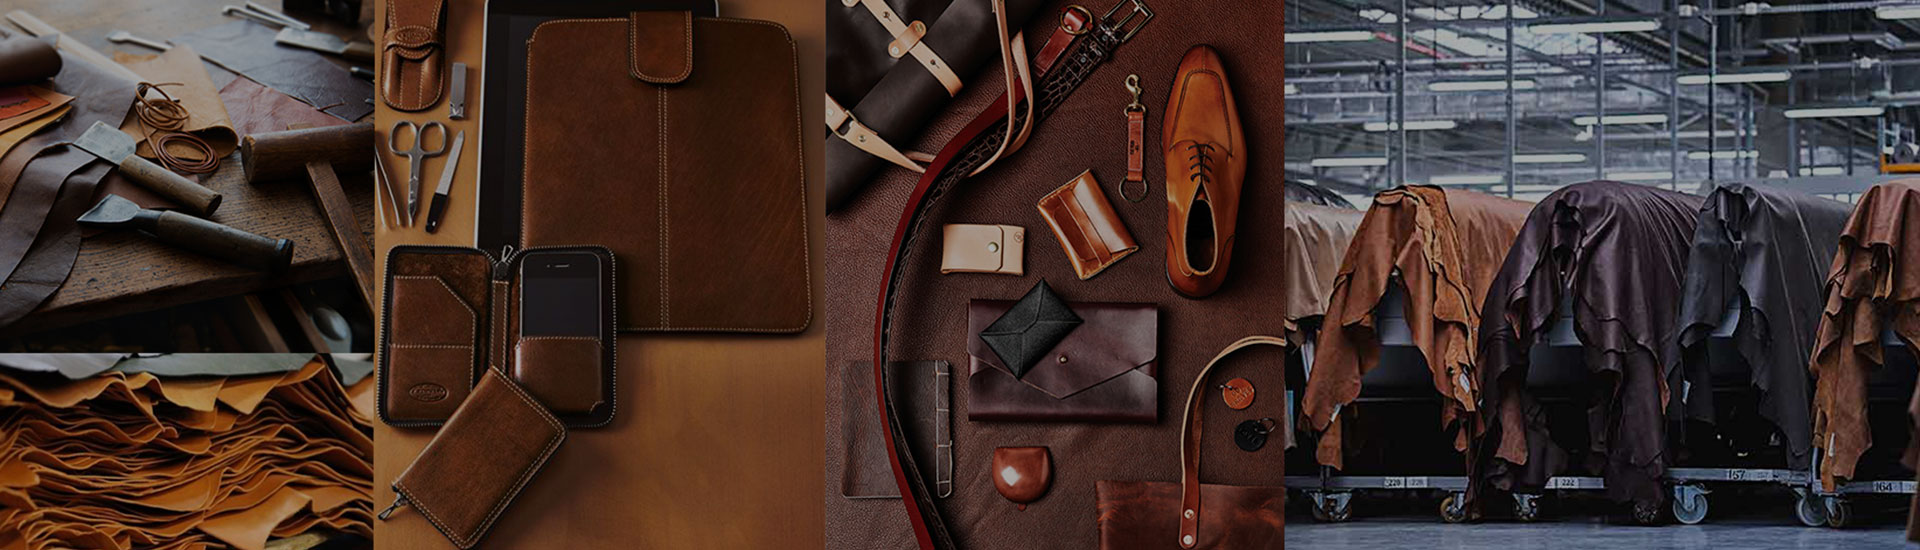 Leather Goods, Products and Accessories Manufacturer in India | Industry Experts